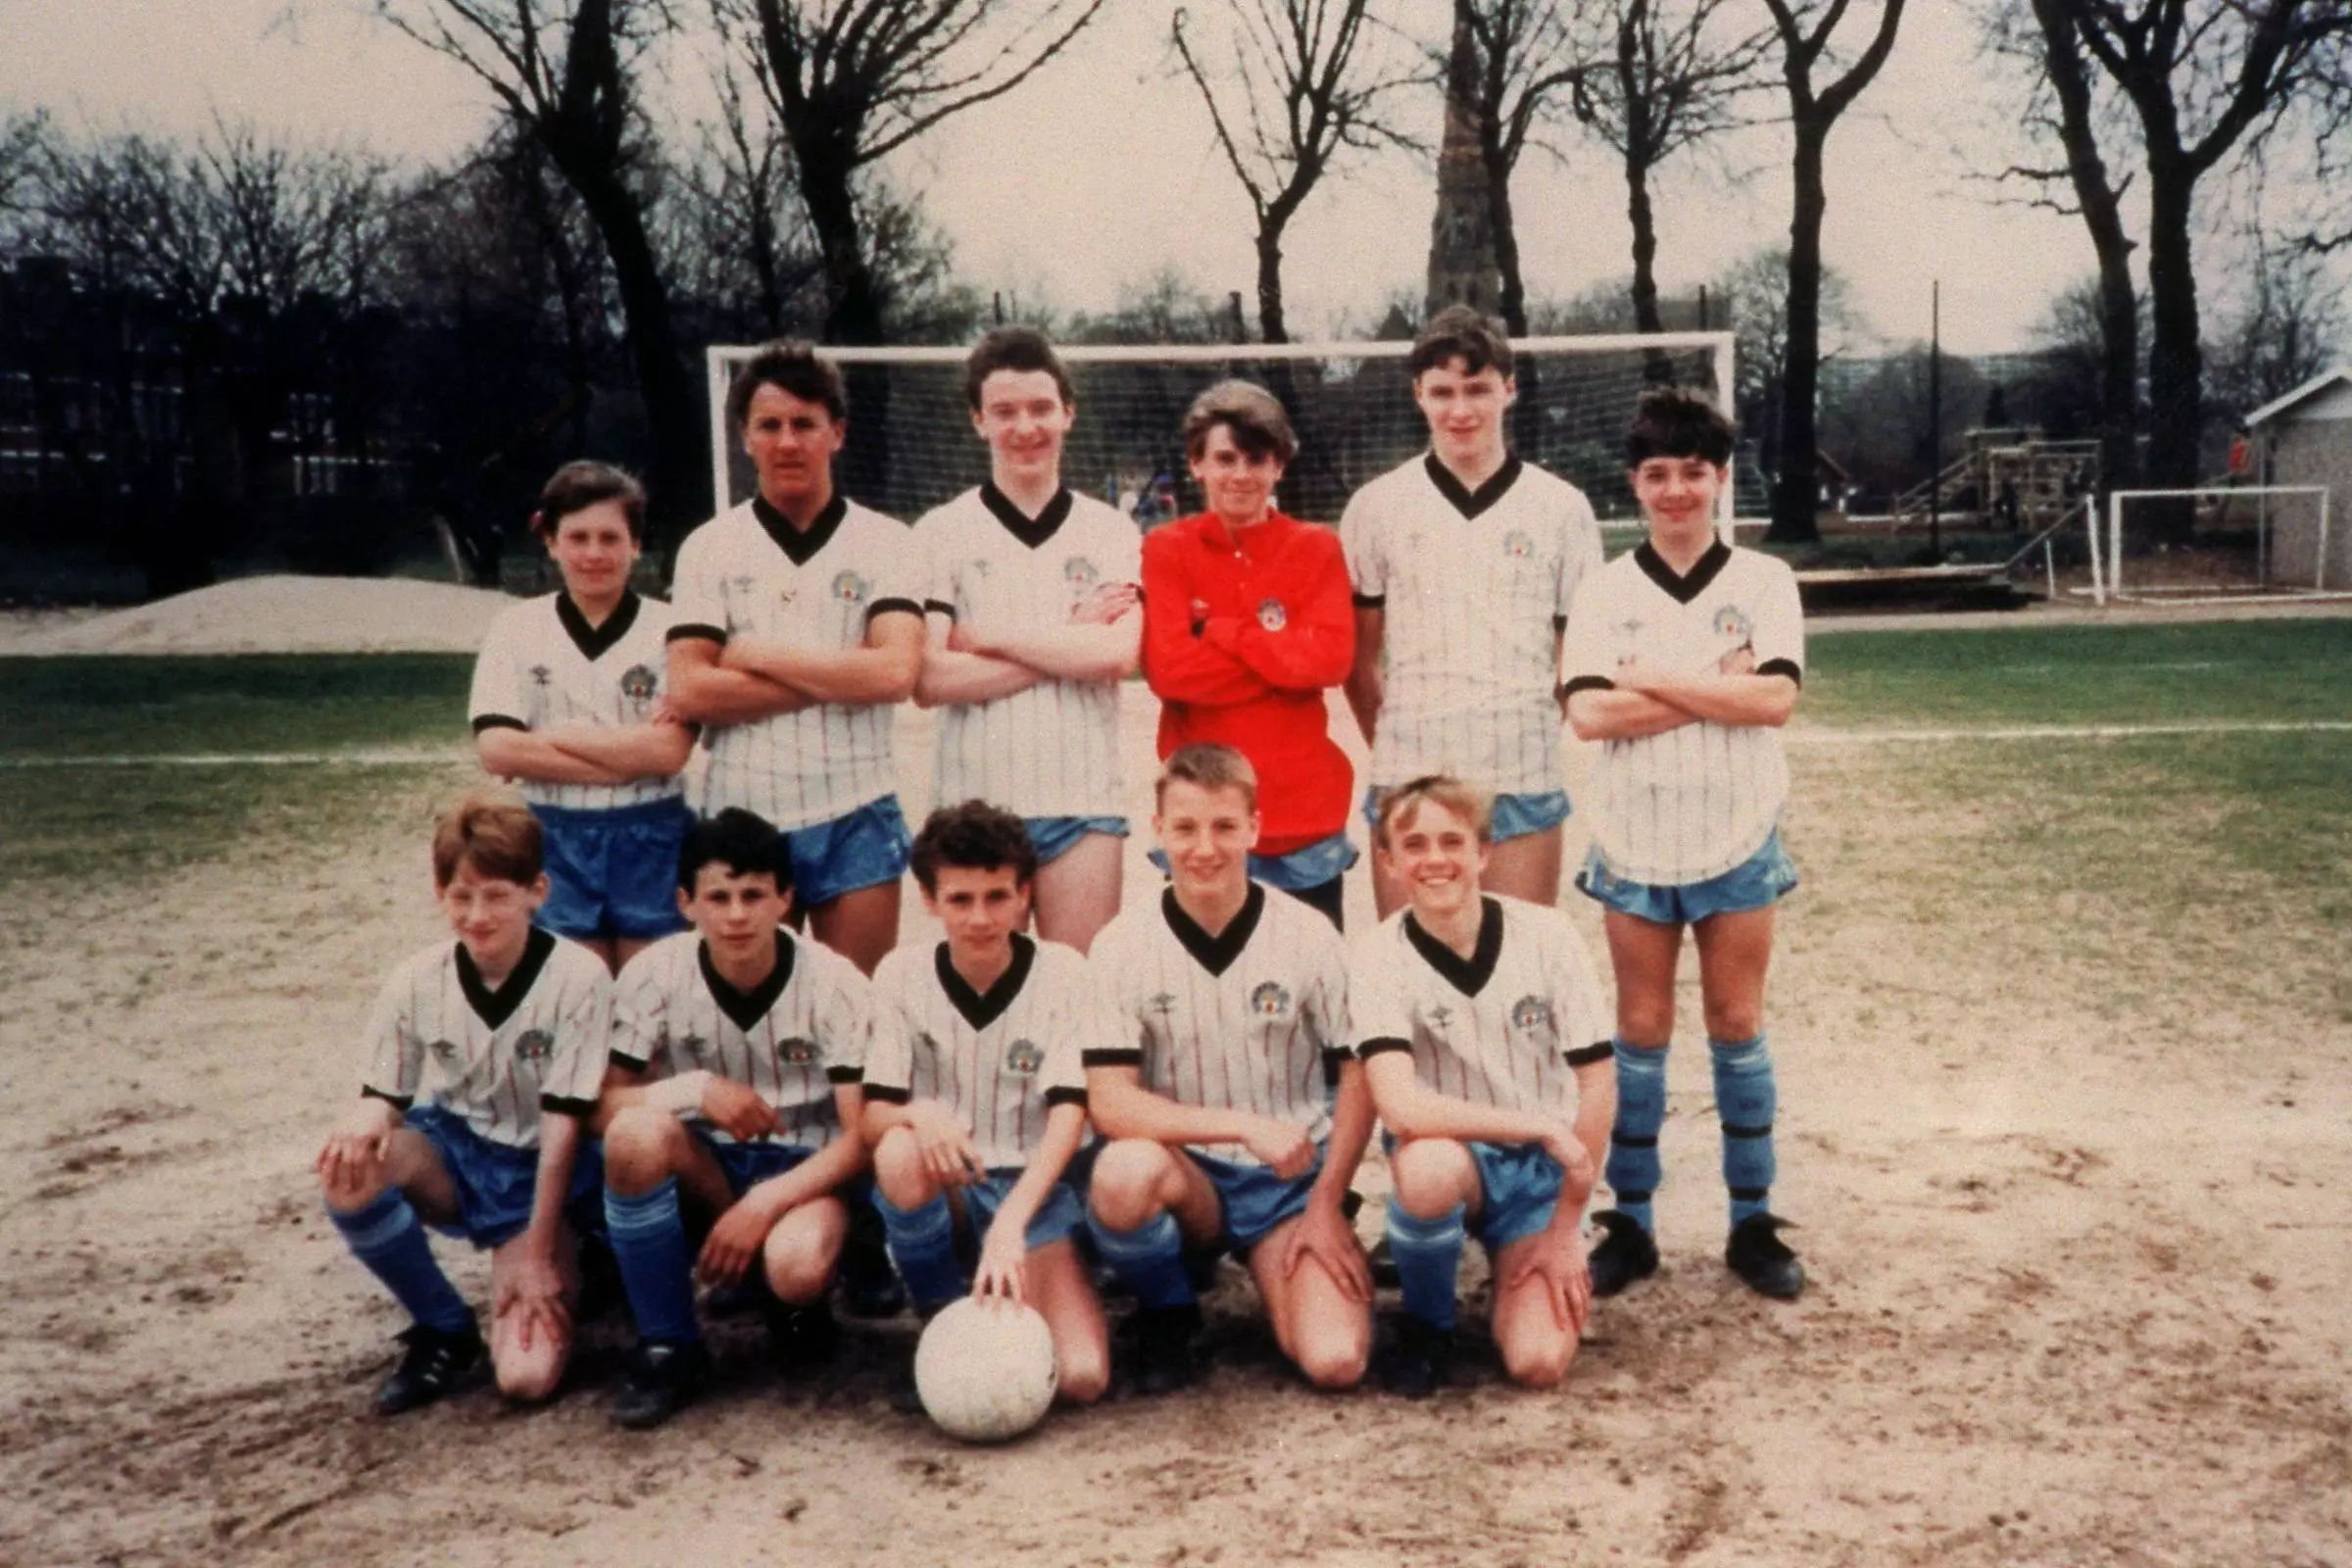 Ryan Giggs: front row, second from left